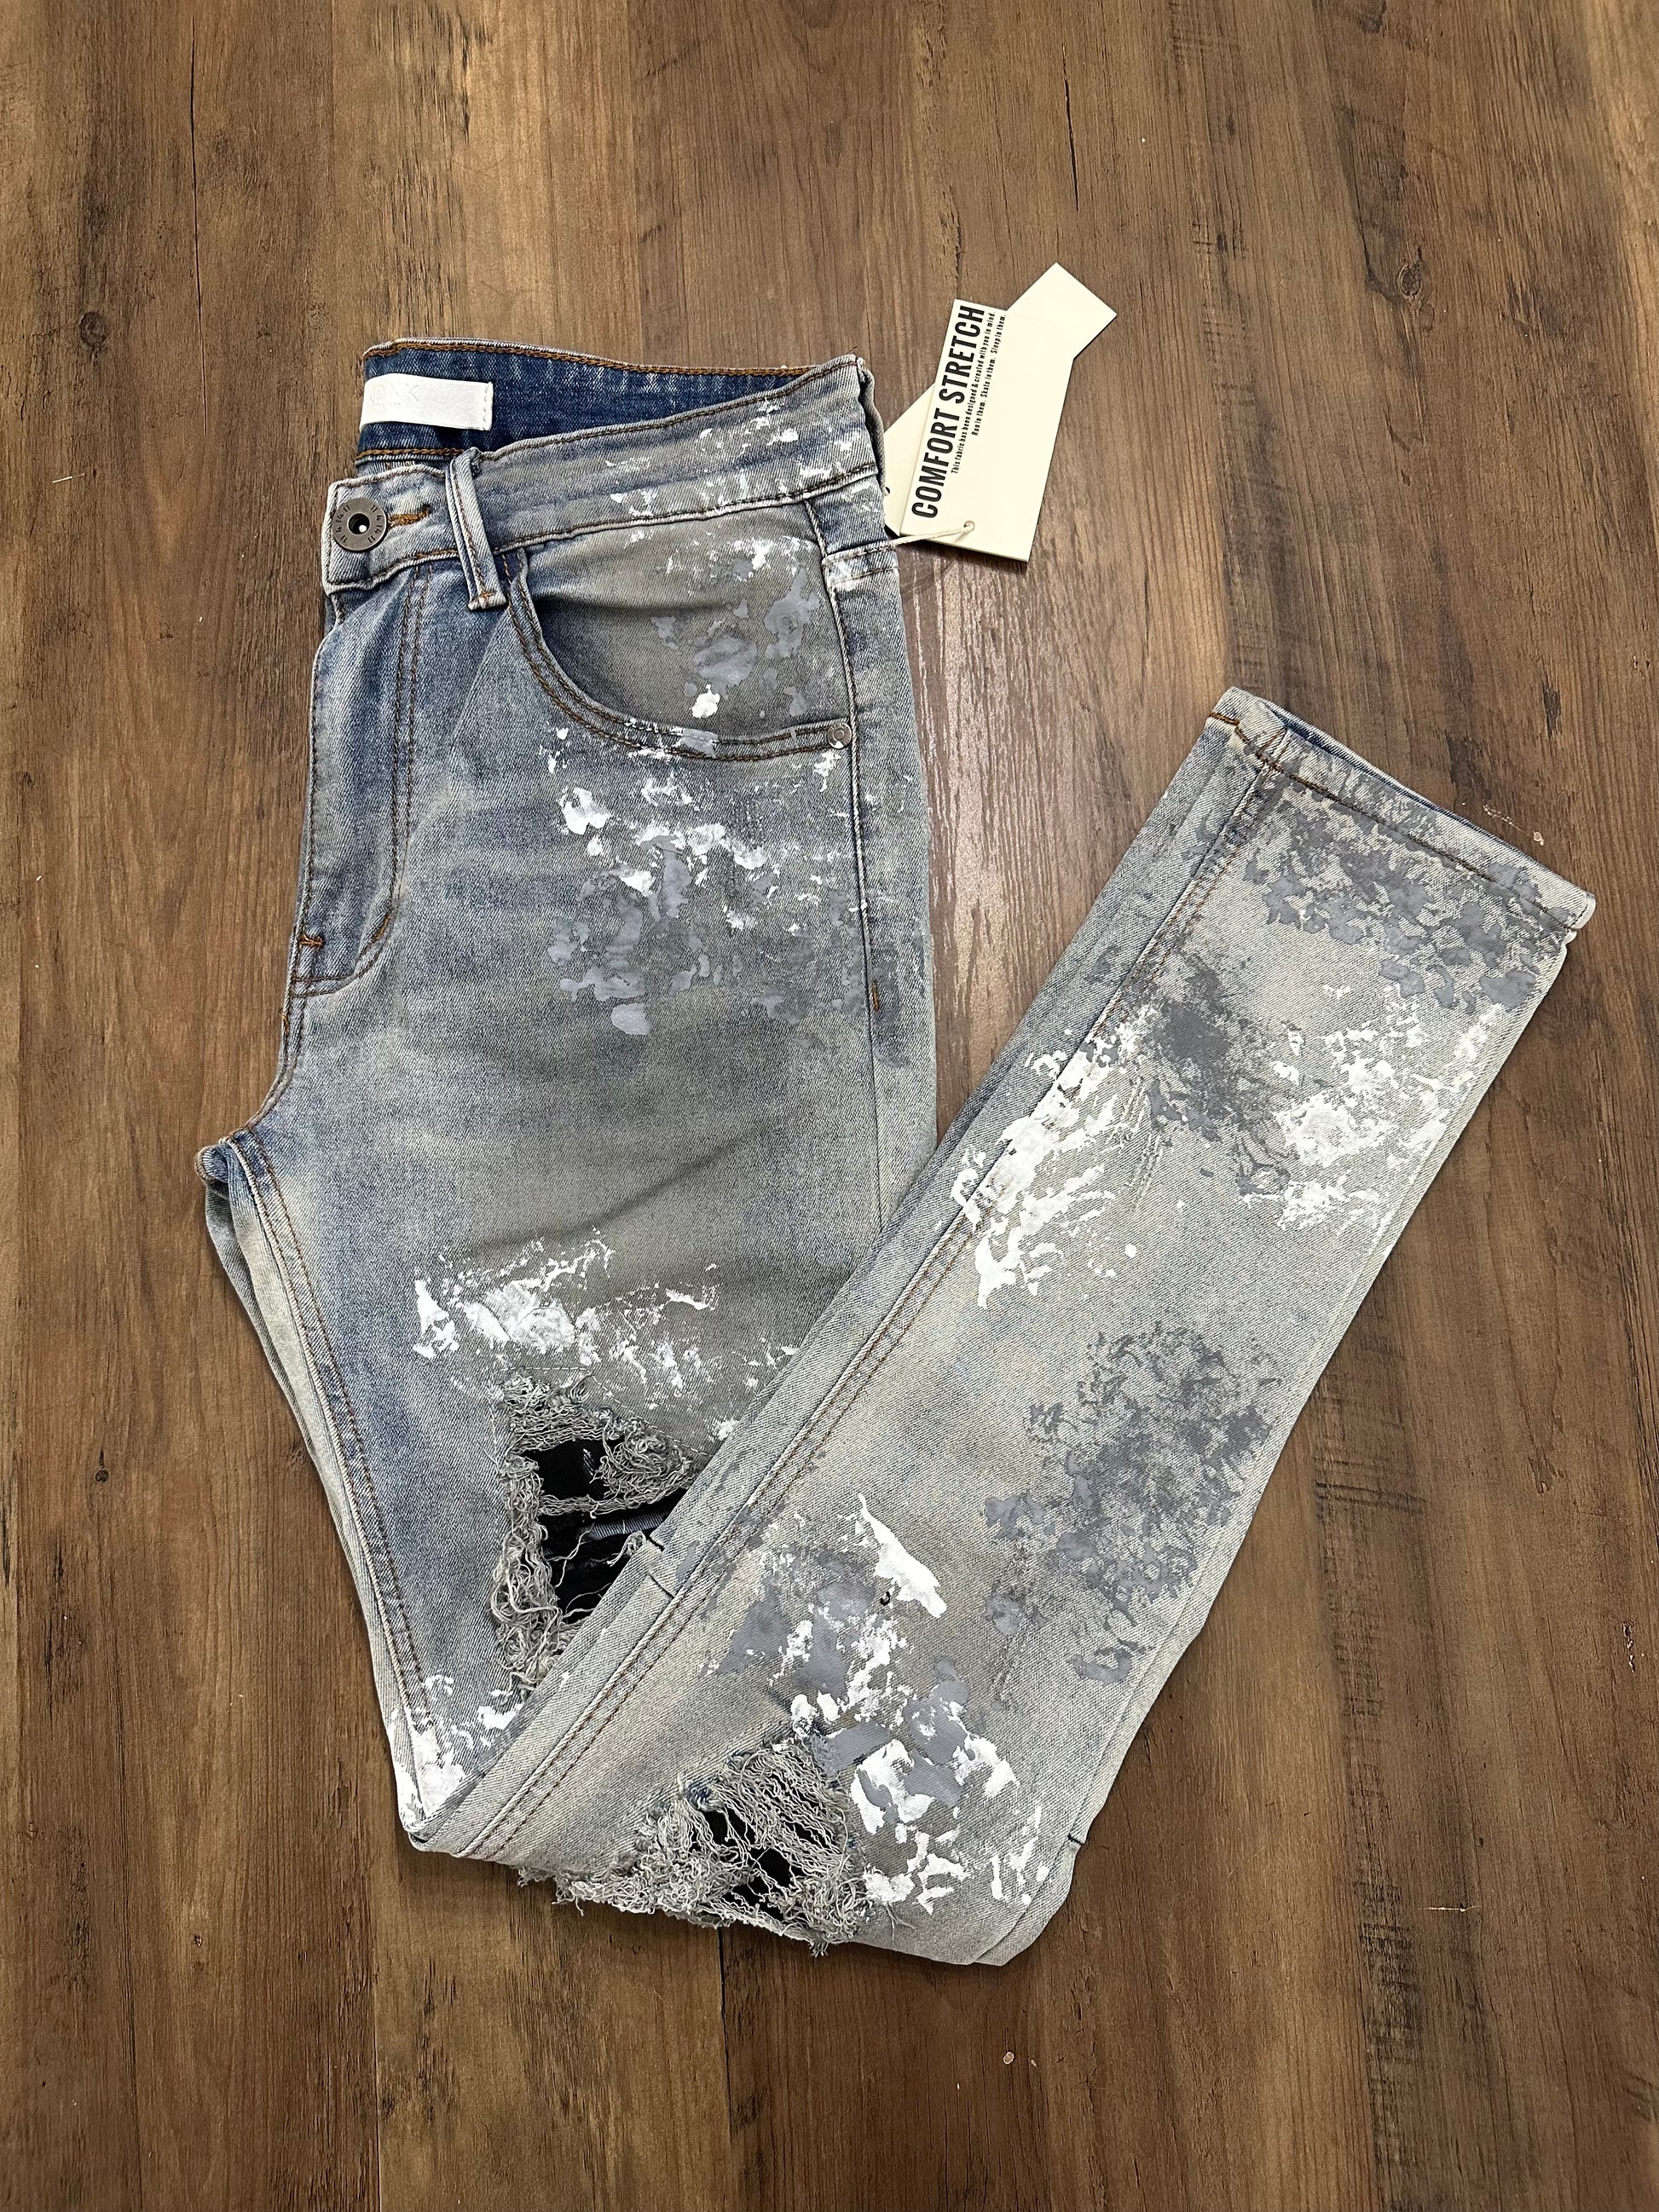 Distressed 'Paintjob' jean - Made You Look Clothing